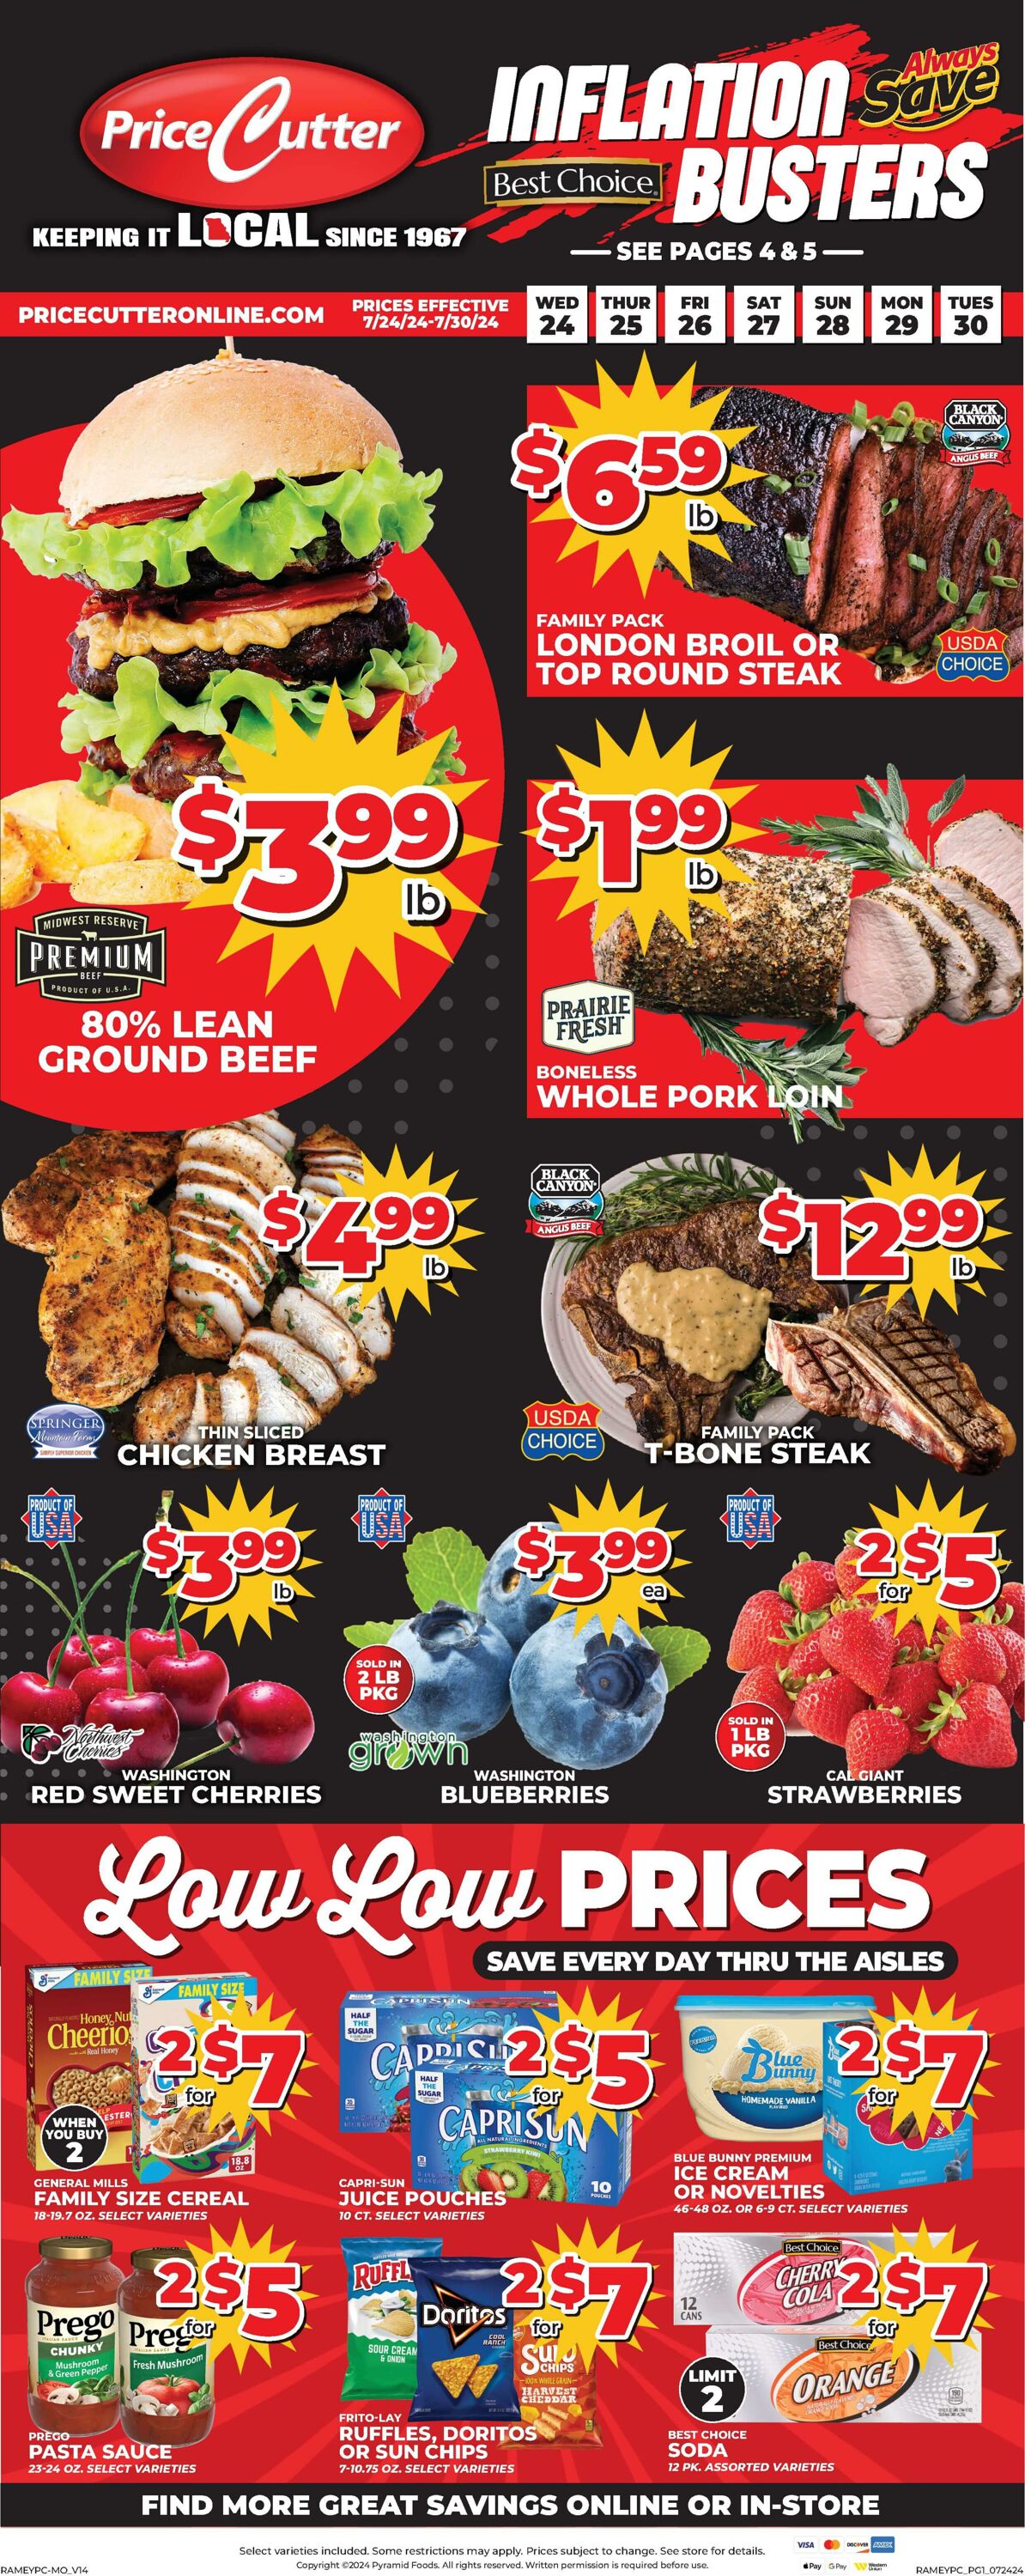 Price Cutter Promotional weekly ads